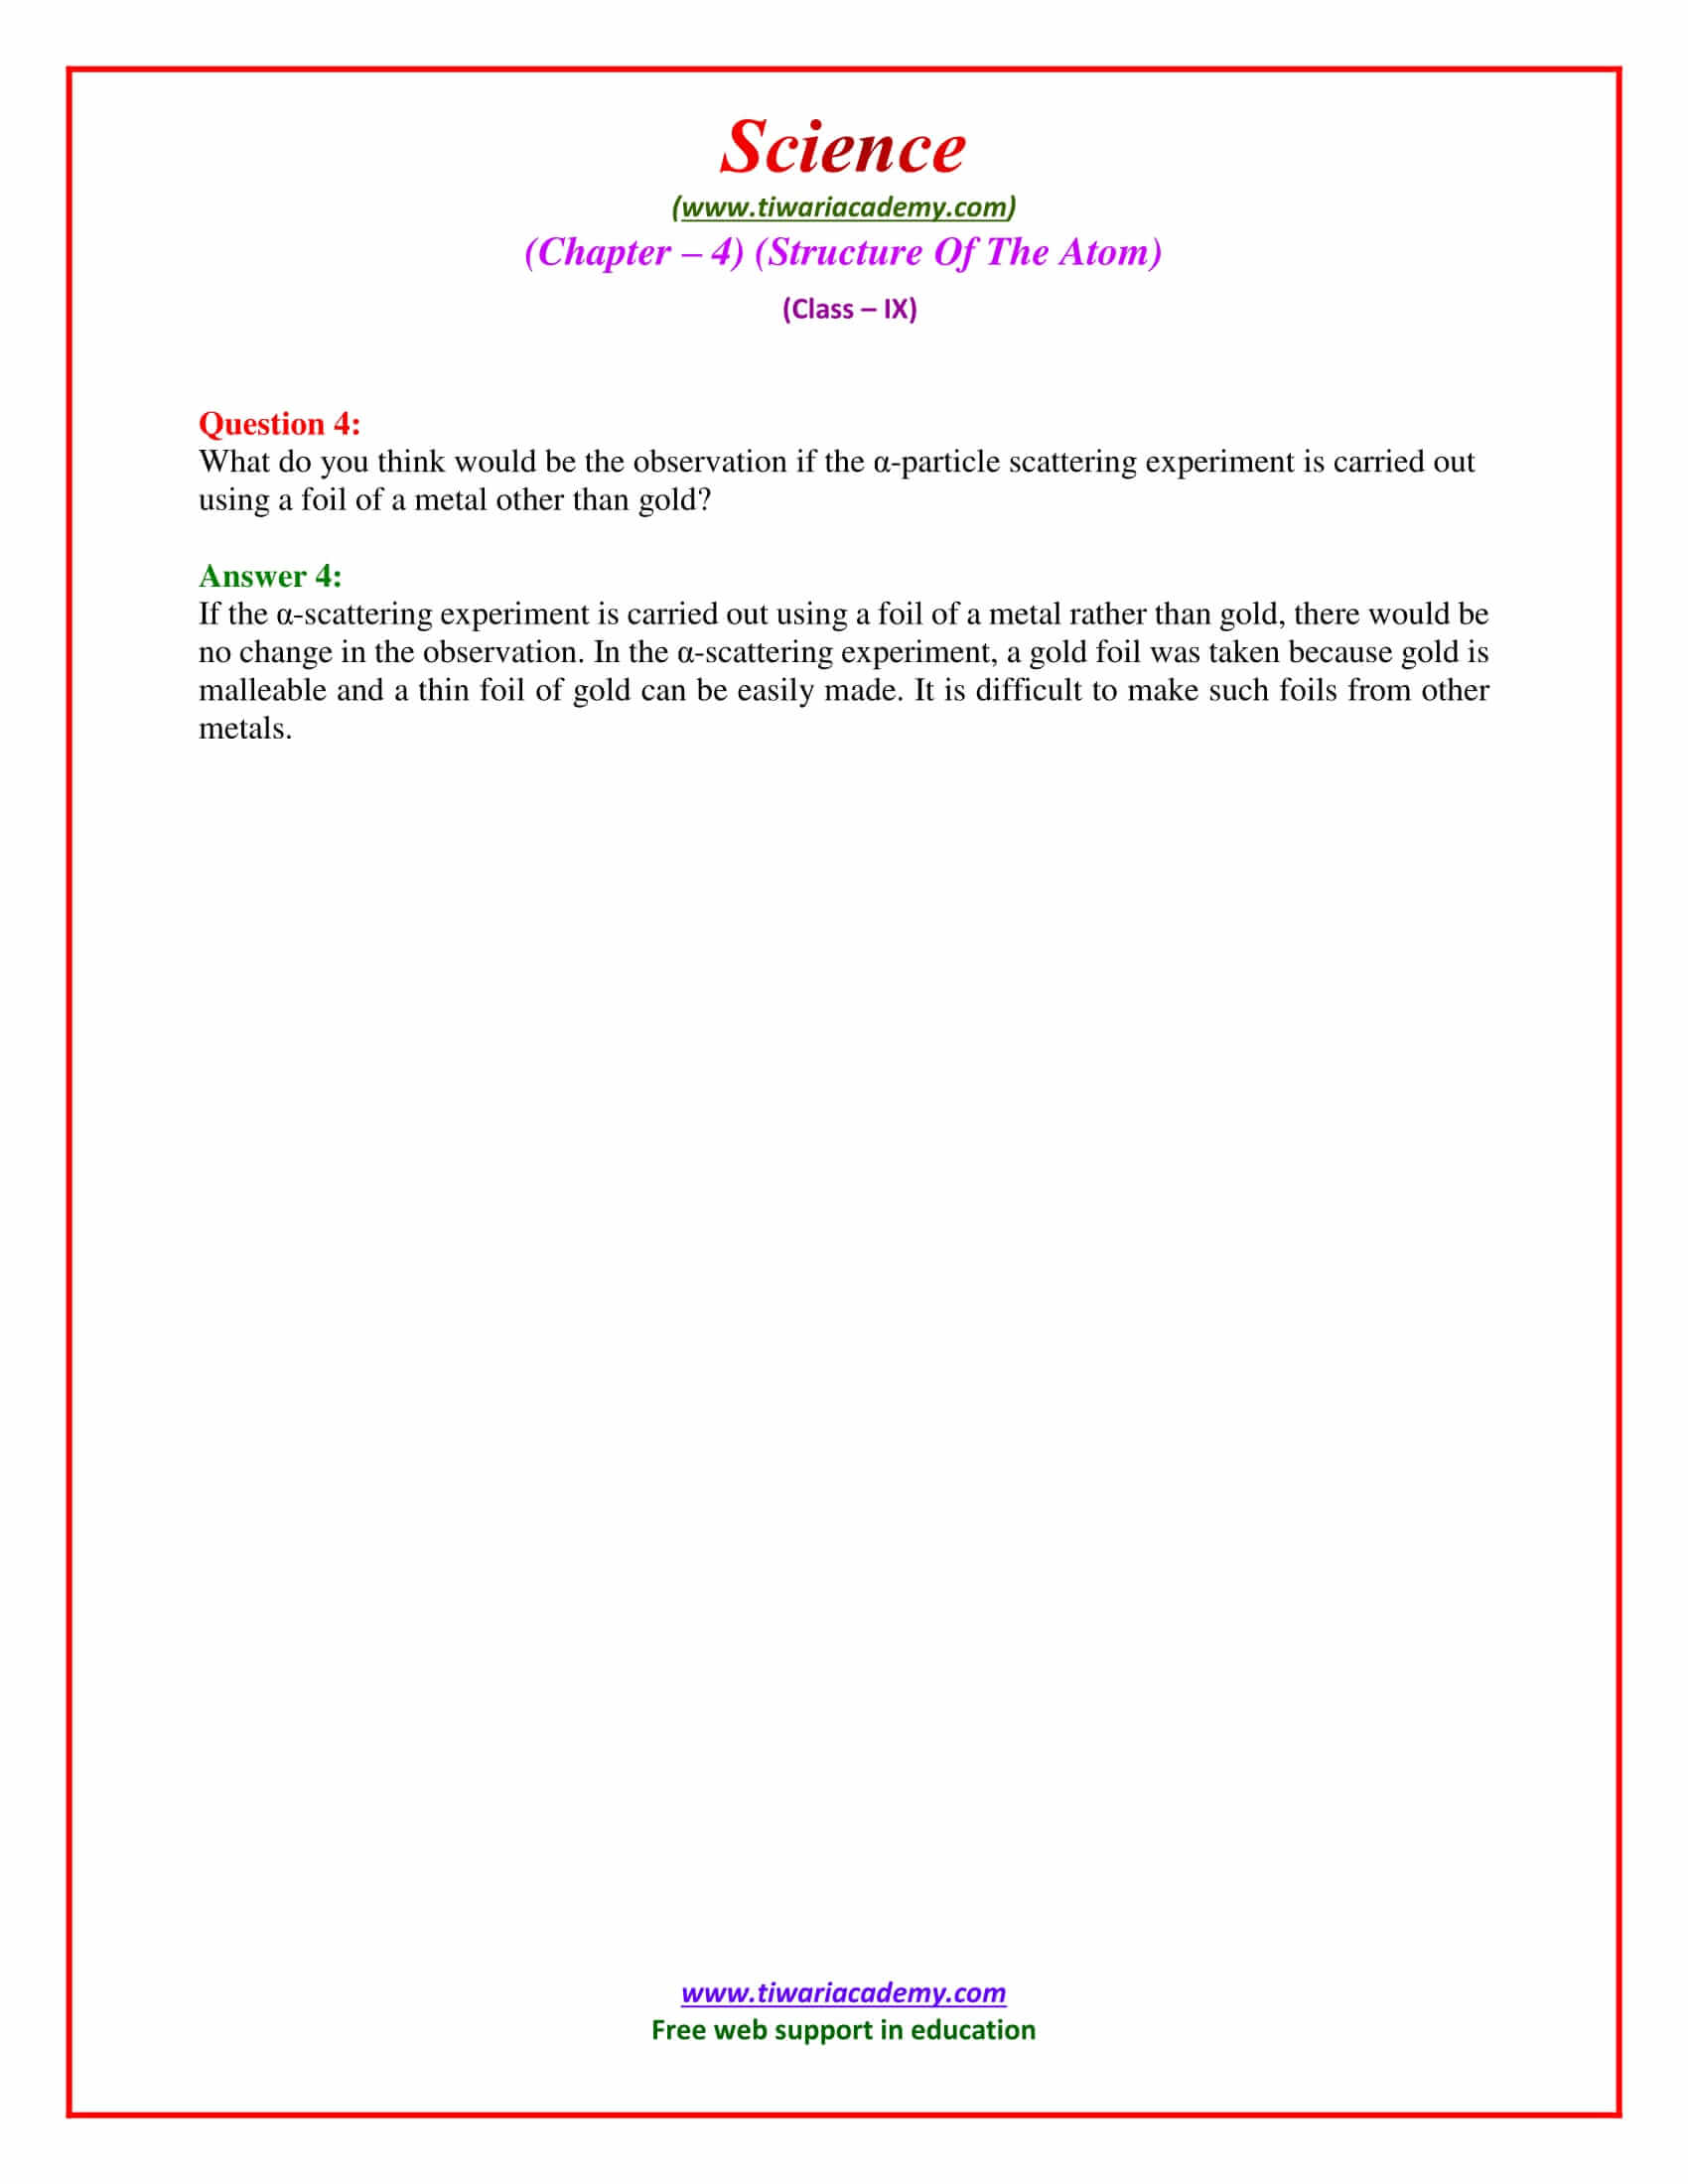 NCERT Solutions for Class 9 Science Chapter 4 intext questions page 49